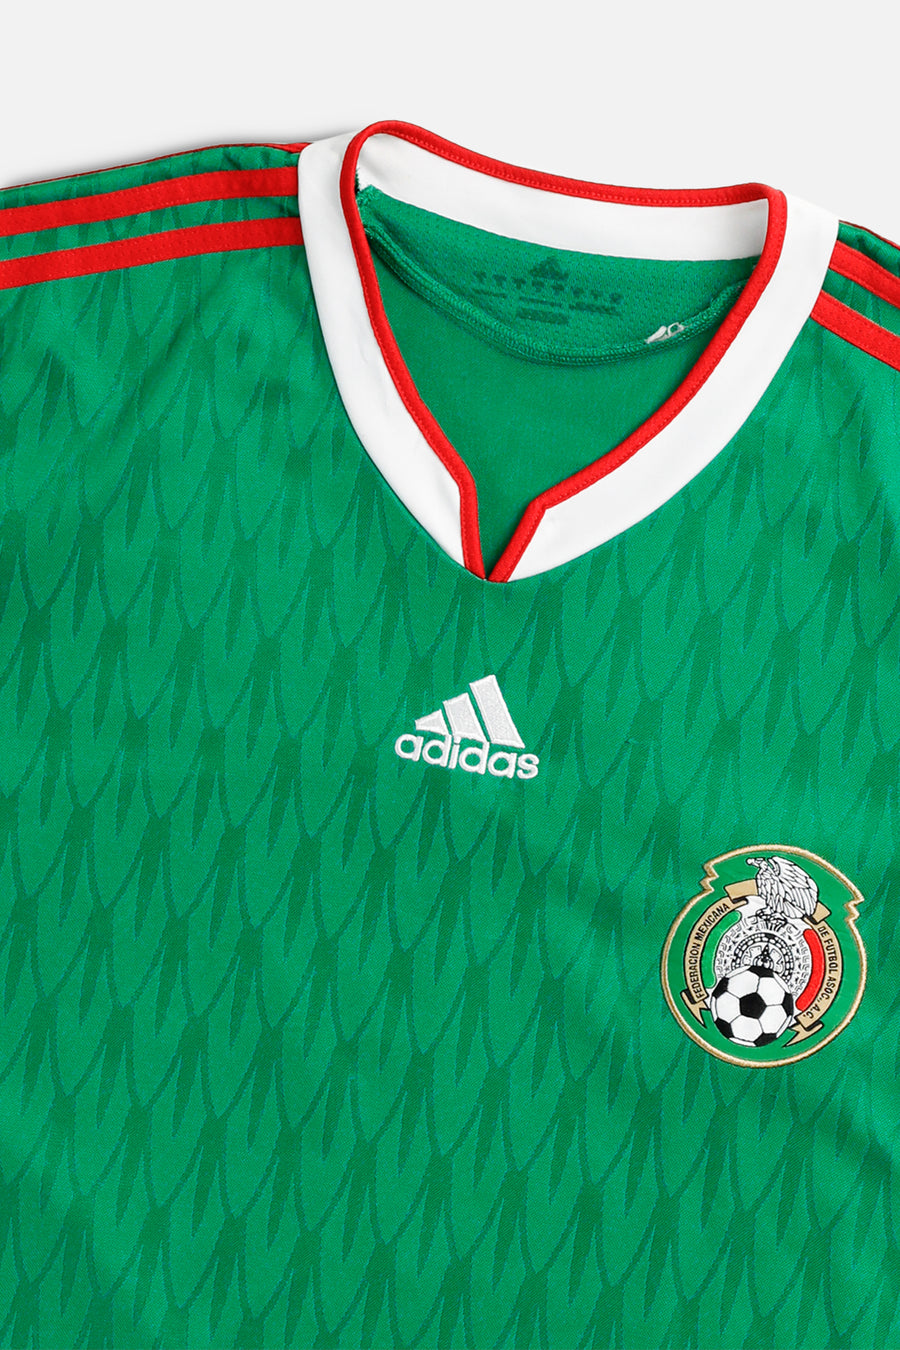 Adidas Mexico Soccer Jersey - Women's M